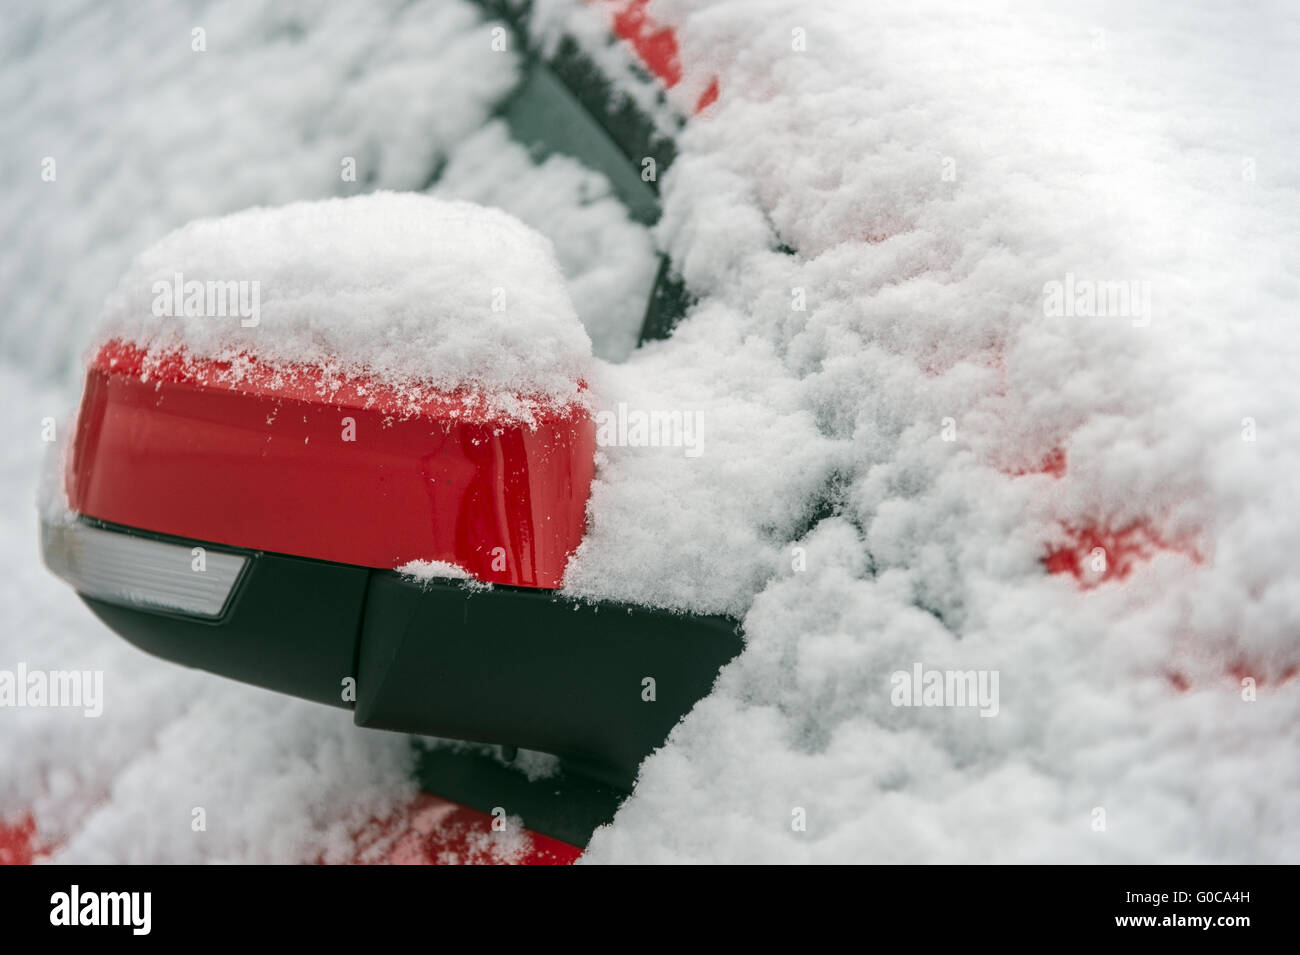 snowy, red rear view mirror of a car Stock Photo